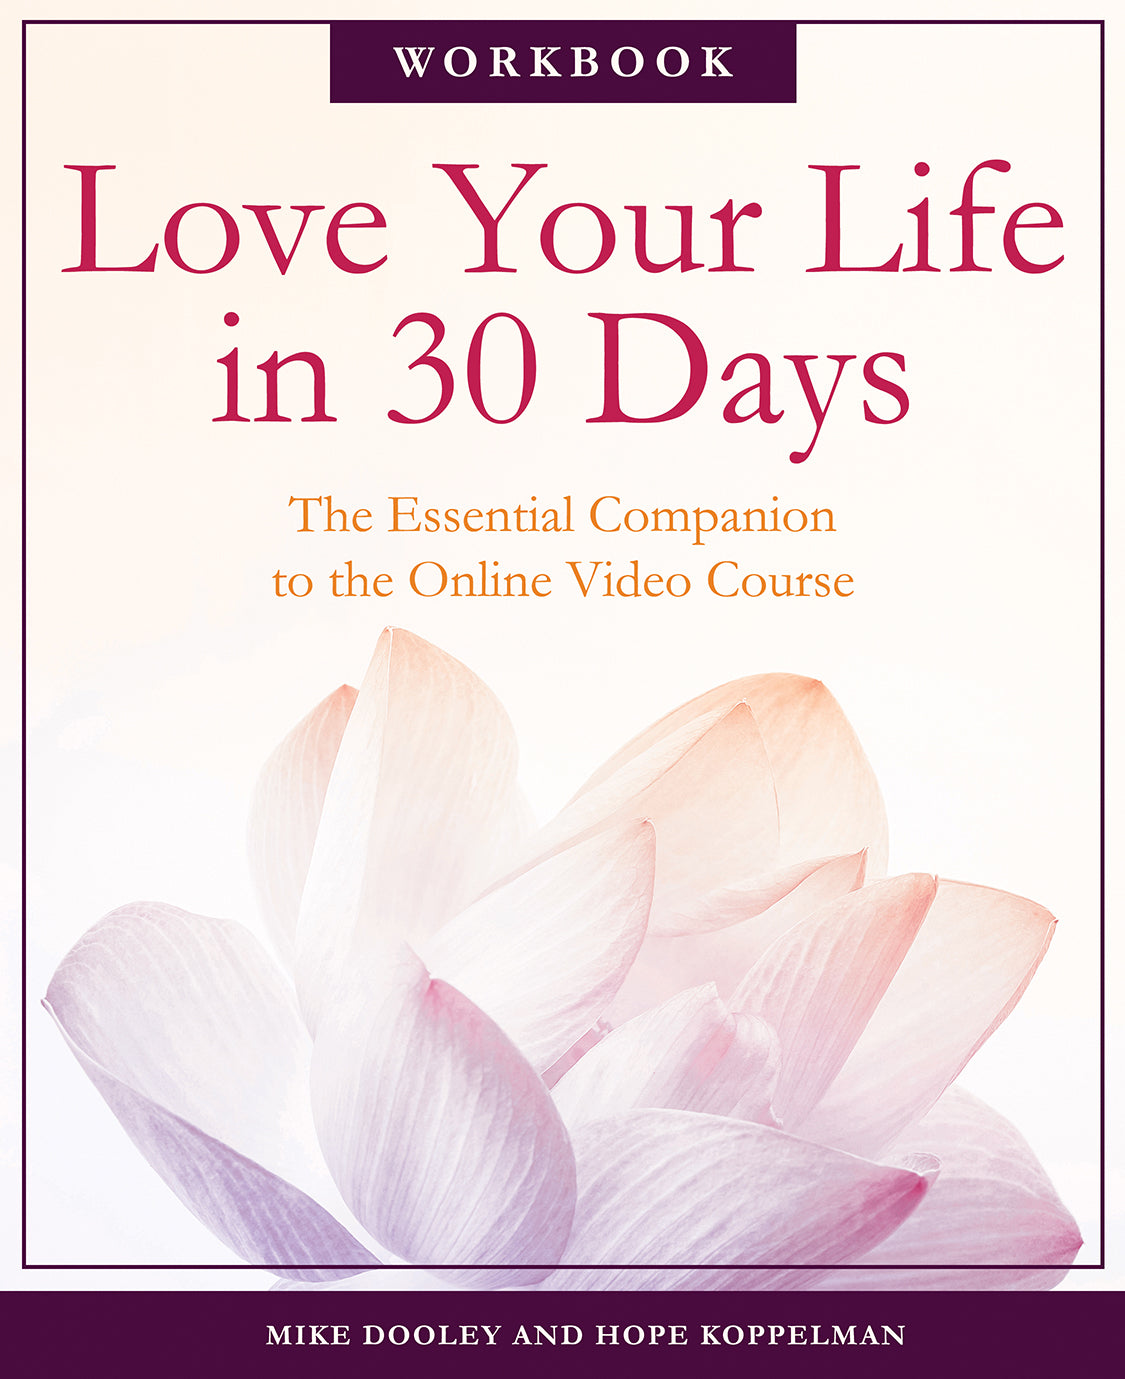 Love Your Life in 30 Days e-Book